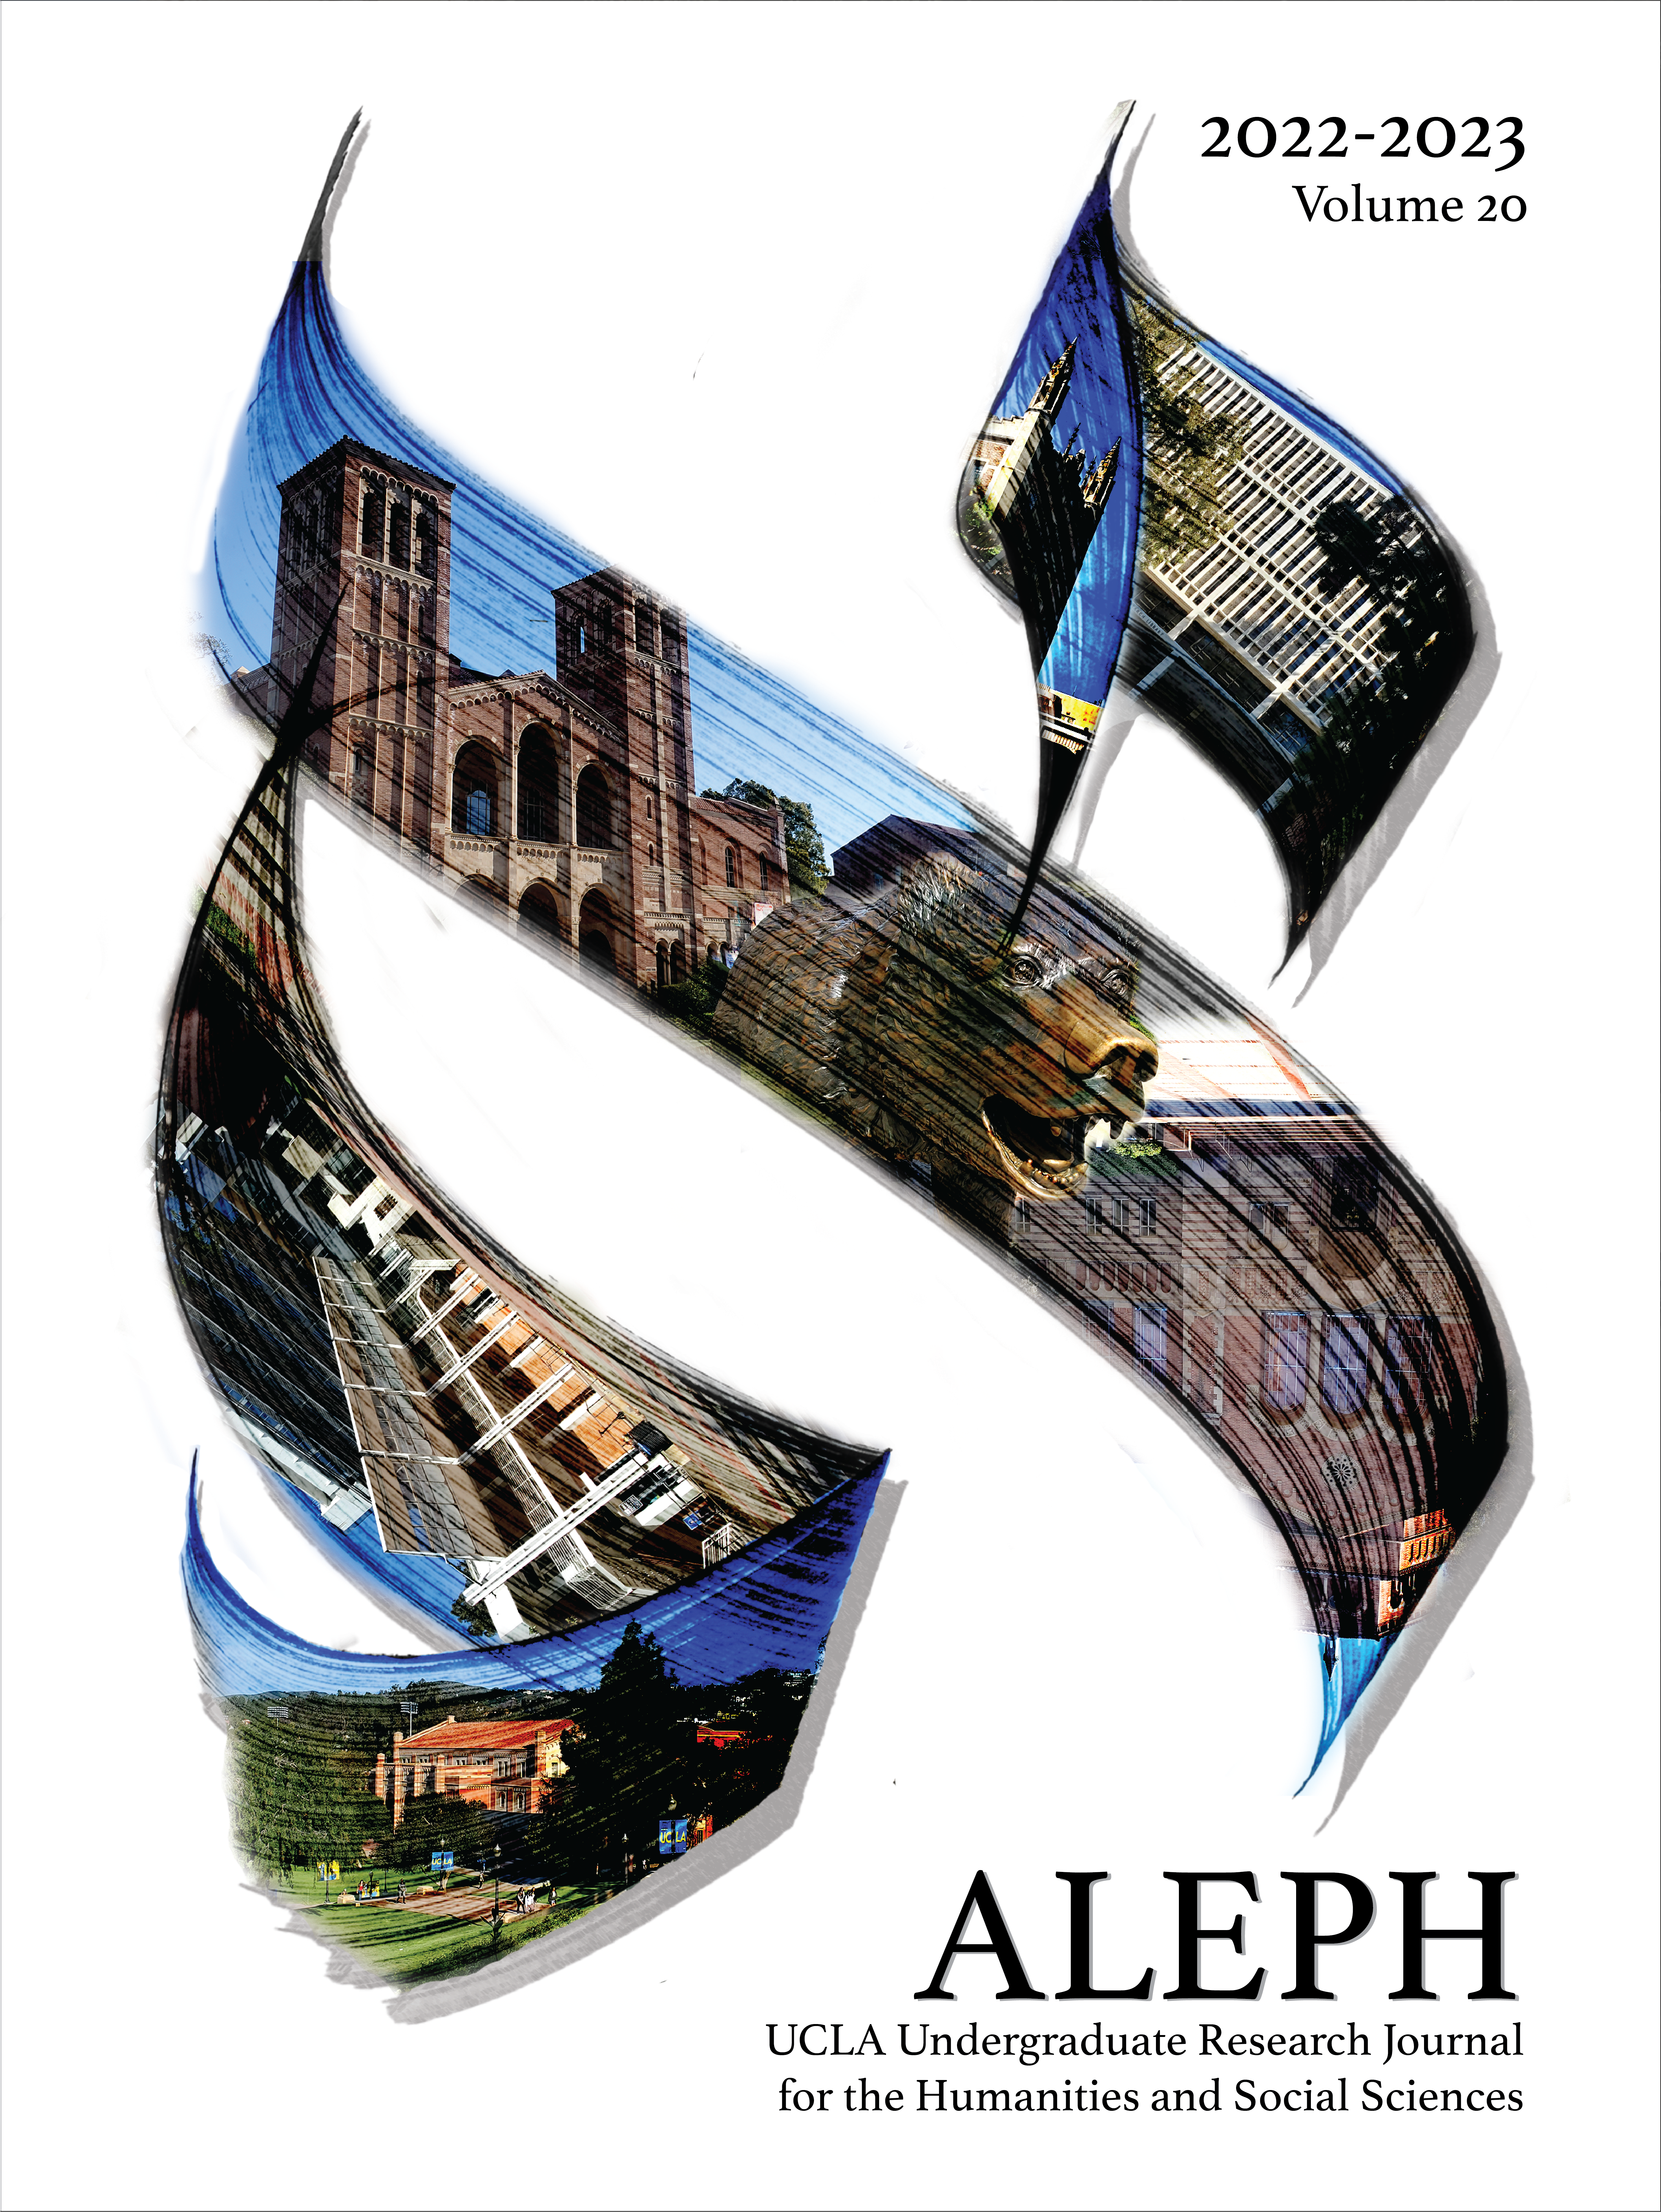 Aleph, UCLA Undergraduate Research Journal for the Humanities and Social Sciences